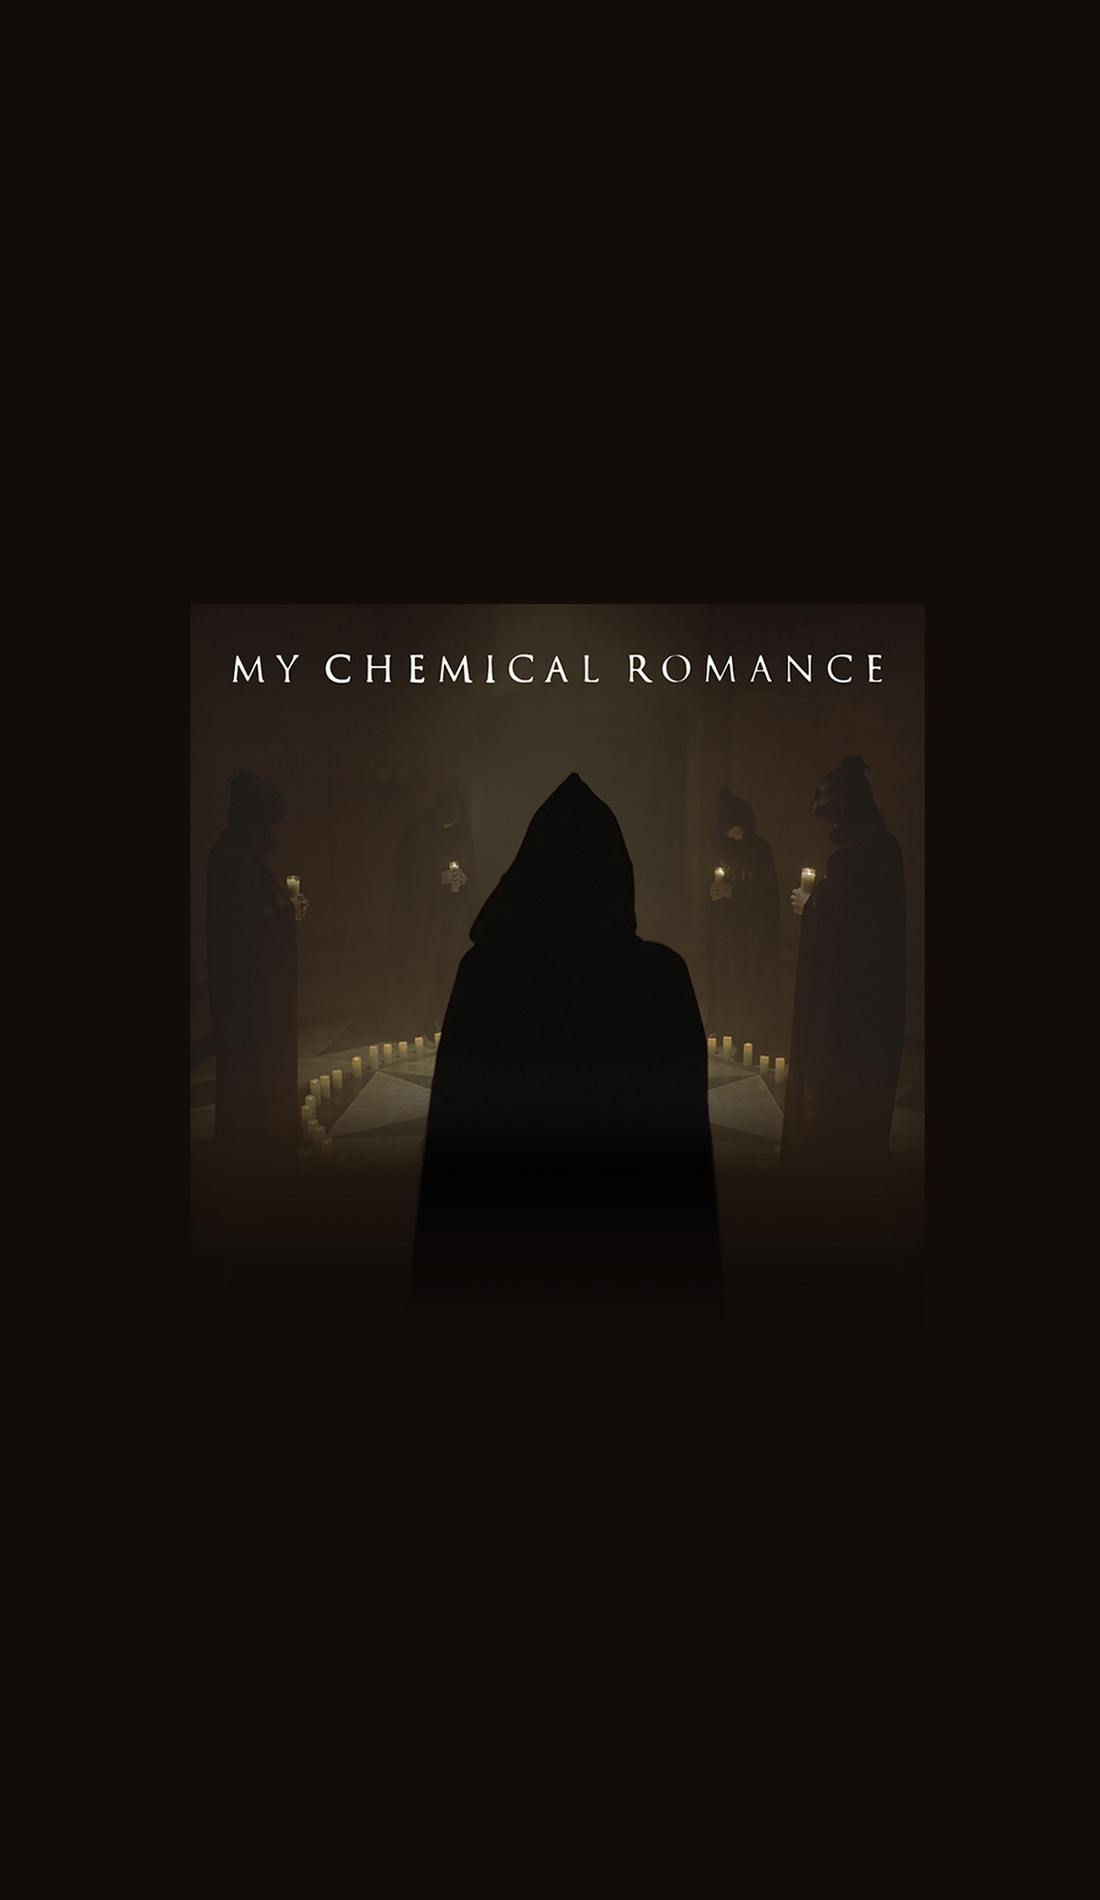 A My Chemical Romance live event